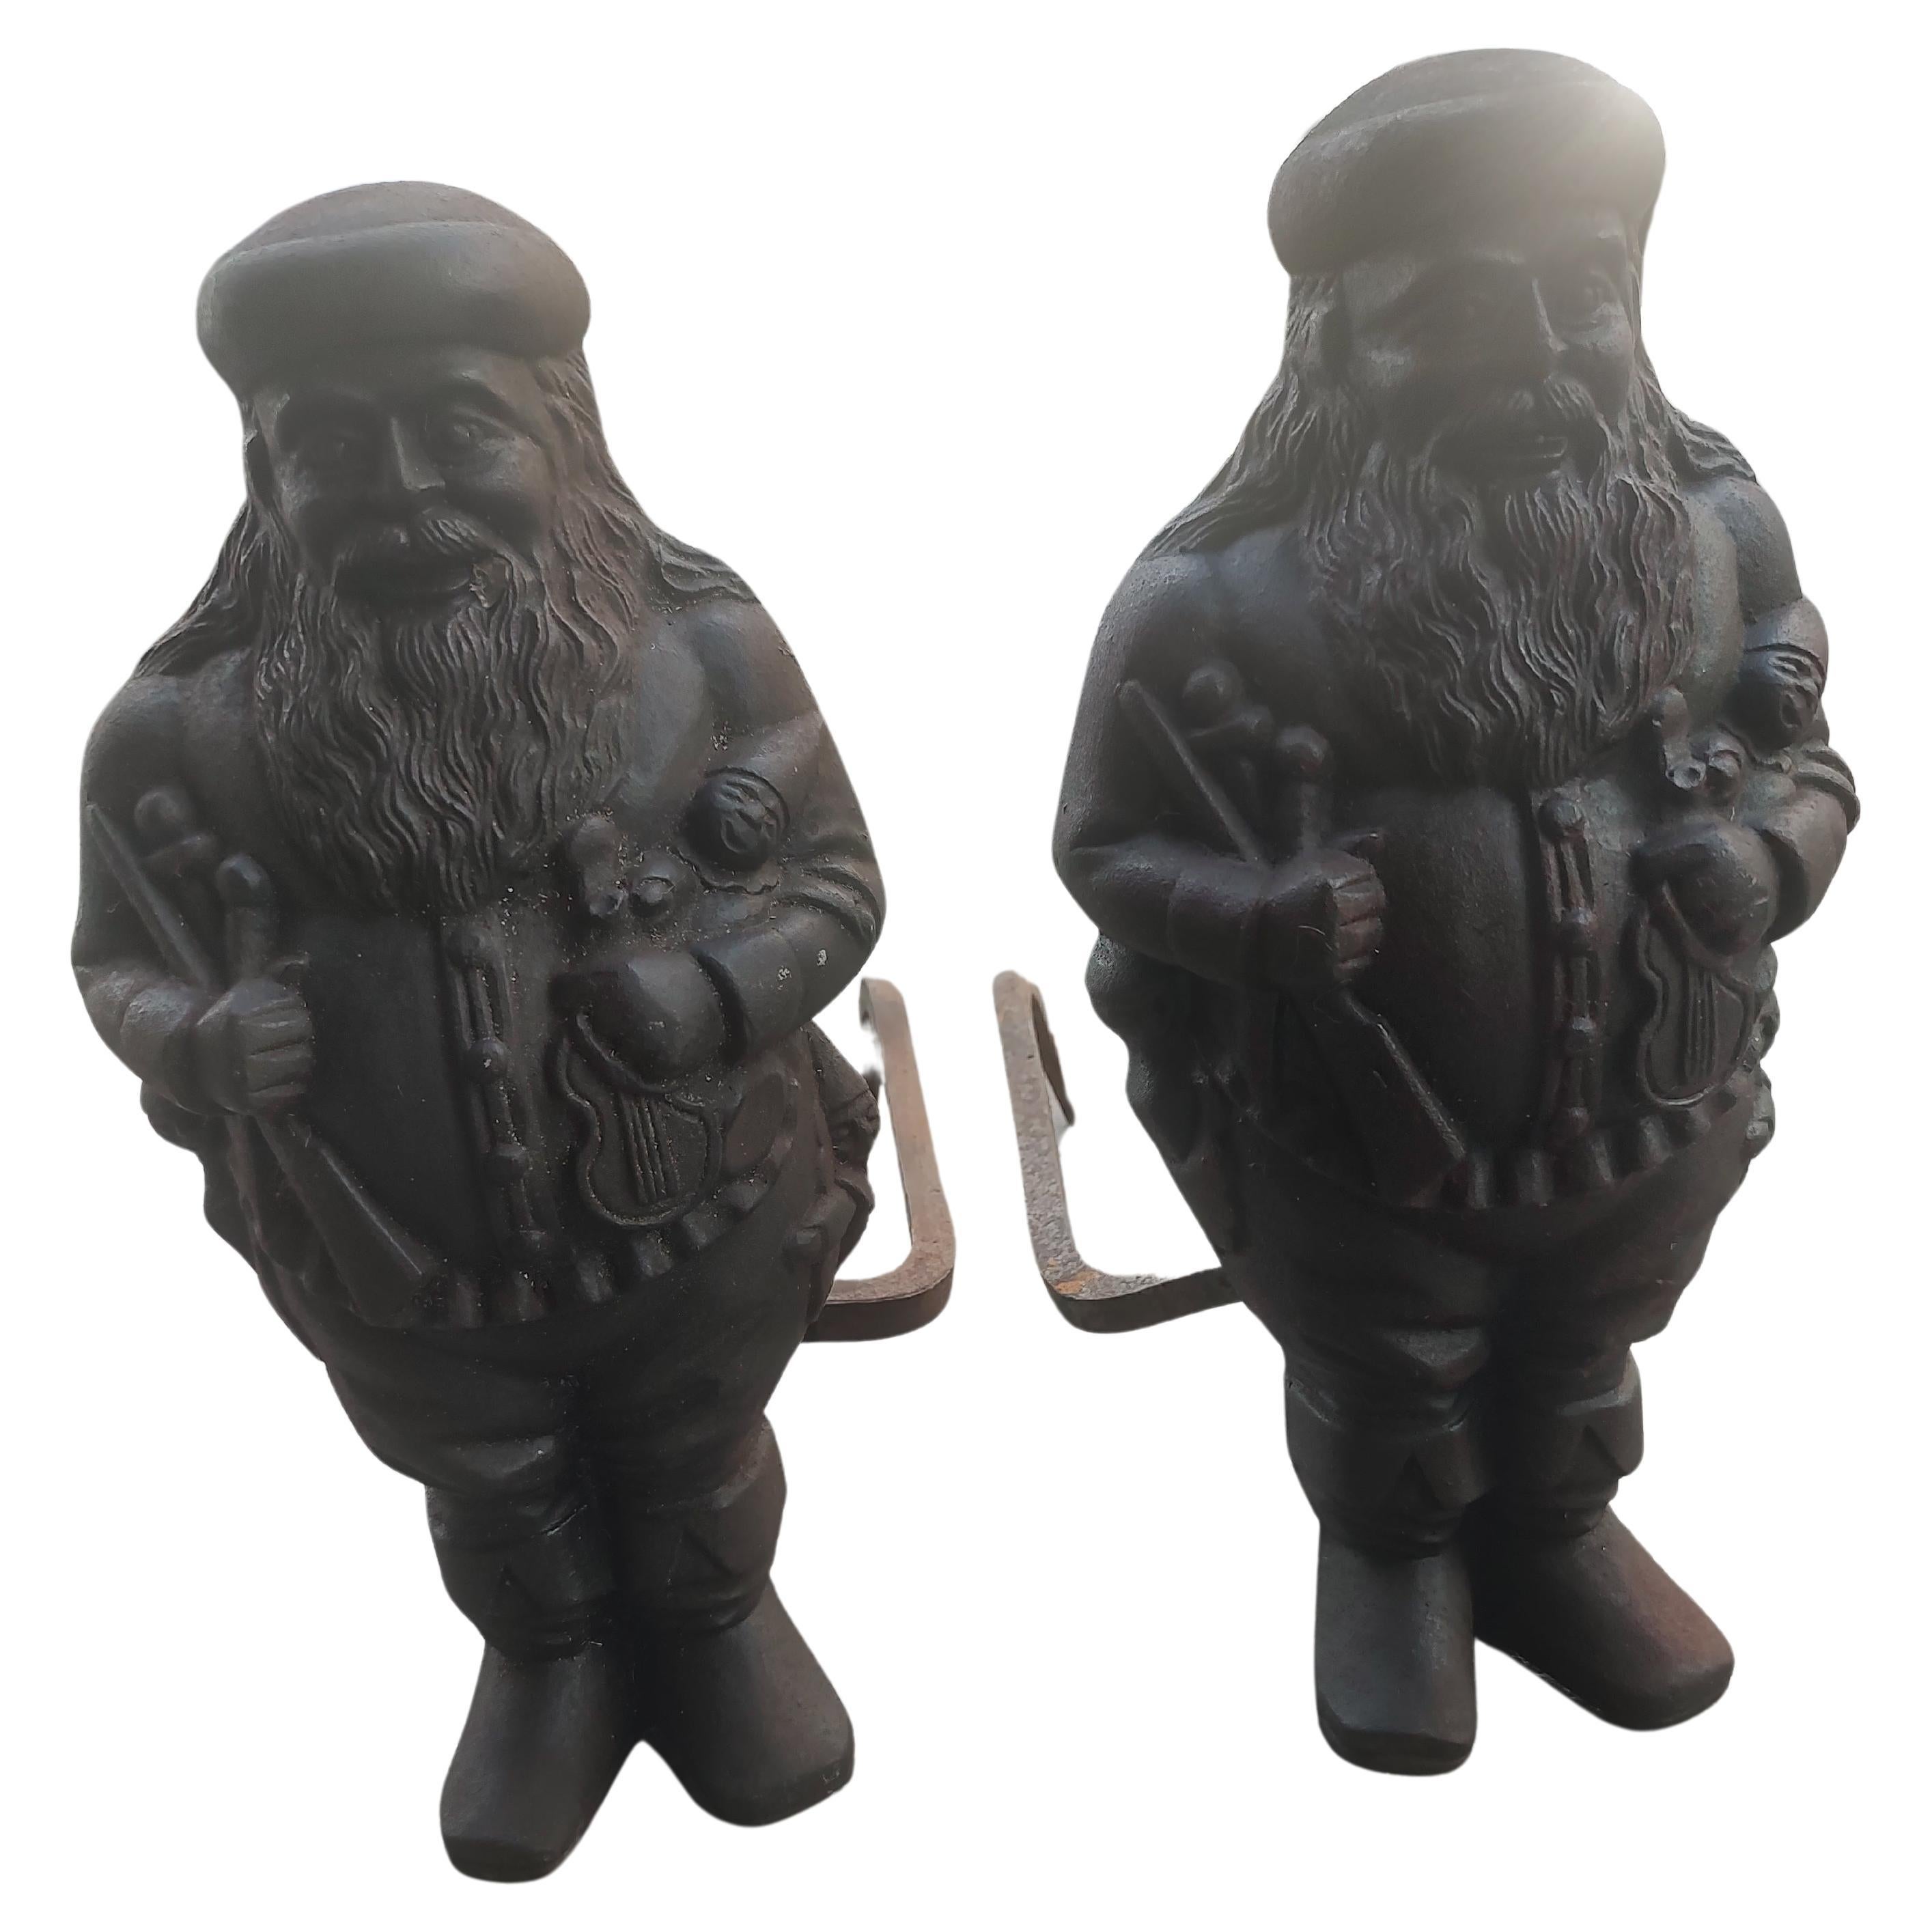 Fabulous pair of cast iron Santa Claus andirons by Virginia Metalcrafters c1950. Excellent castings, very detailed with Santa having toys and presents on his body. In very good condition with just normal wear & tear patina. 